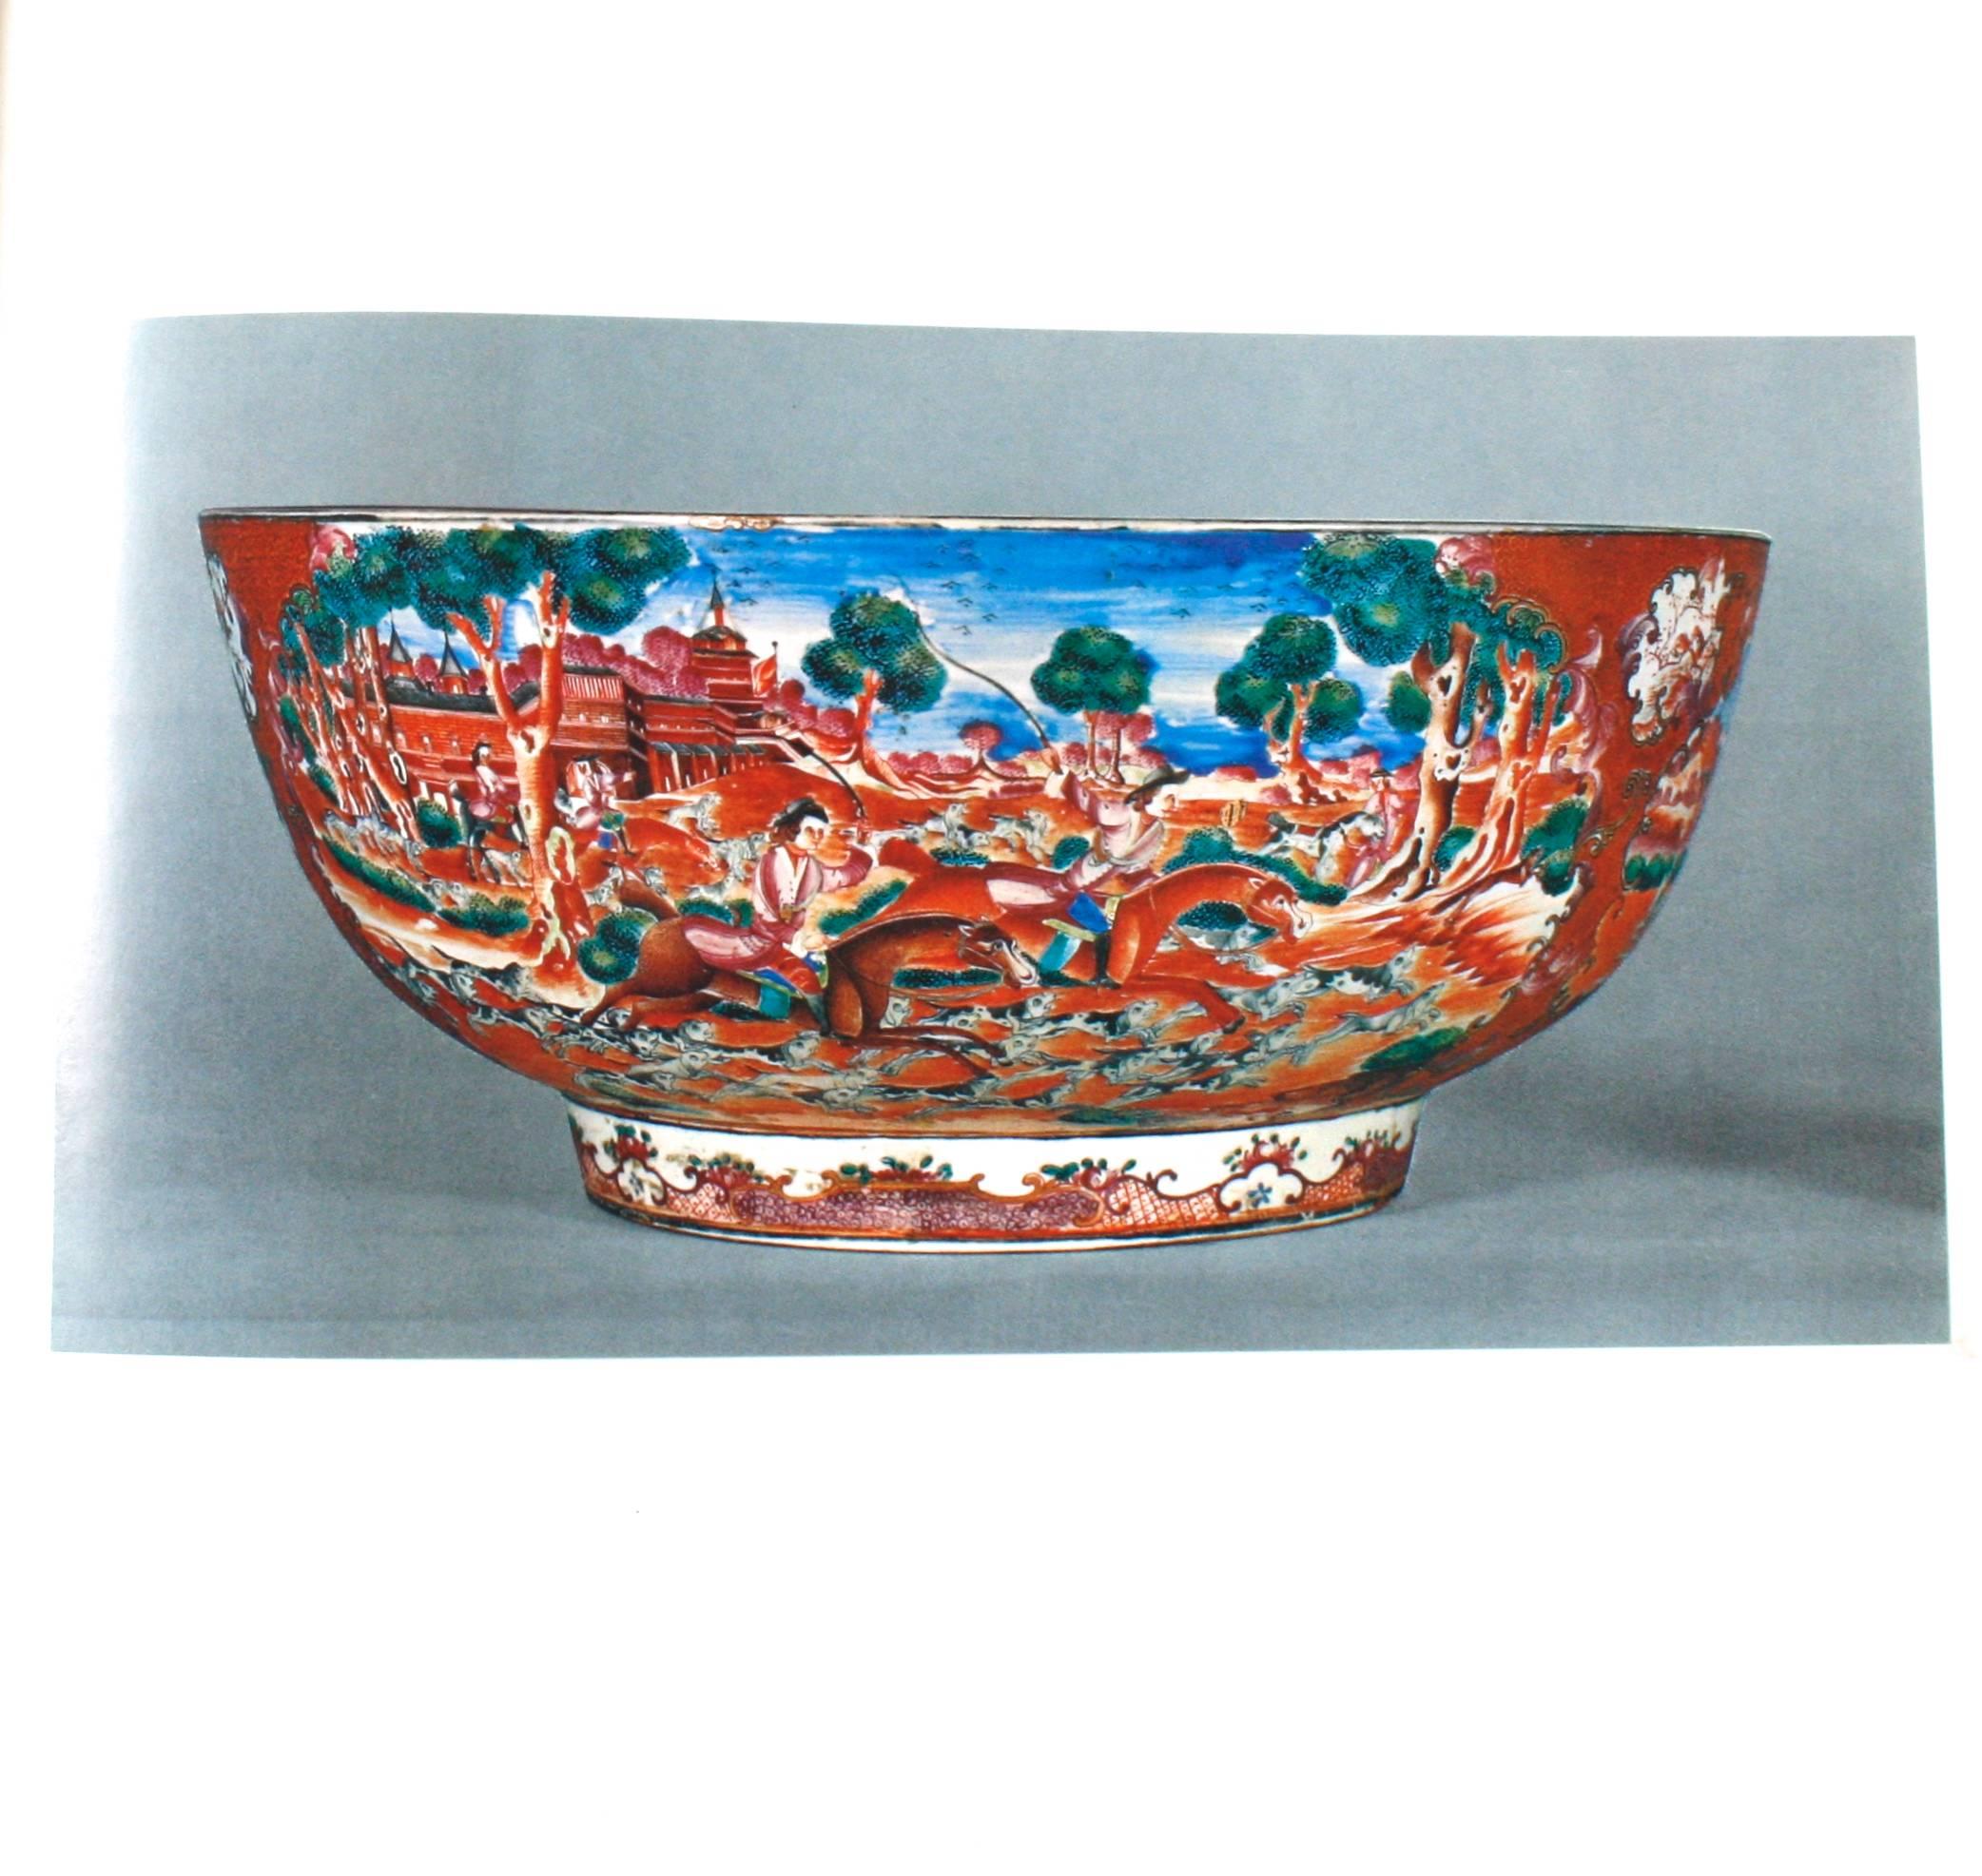 Chinese Trade Porcelain, First Edition by Michel Beurdeley In Good Condition For Sale In valatie, NY